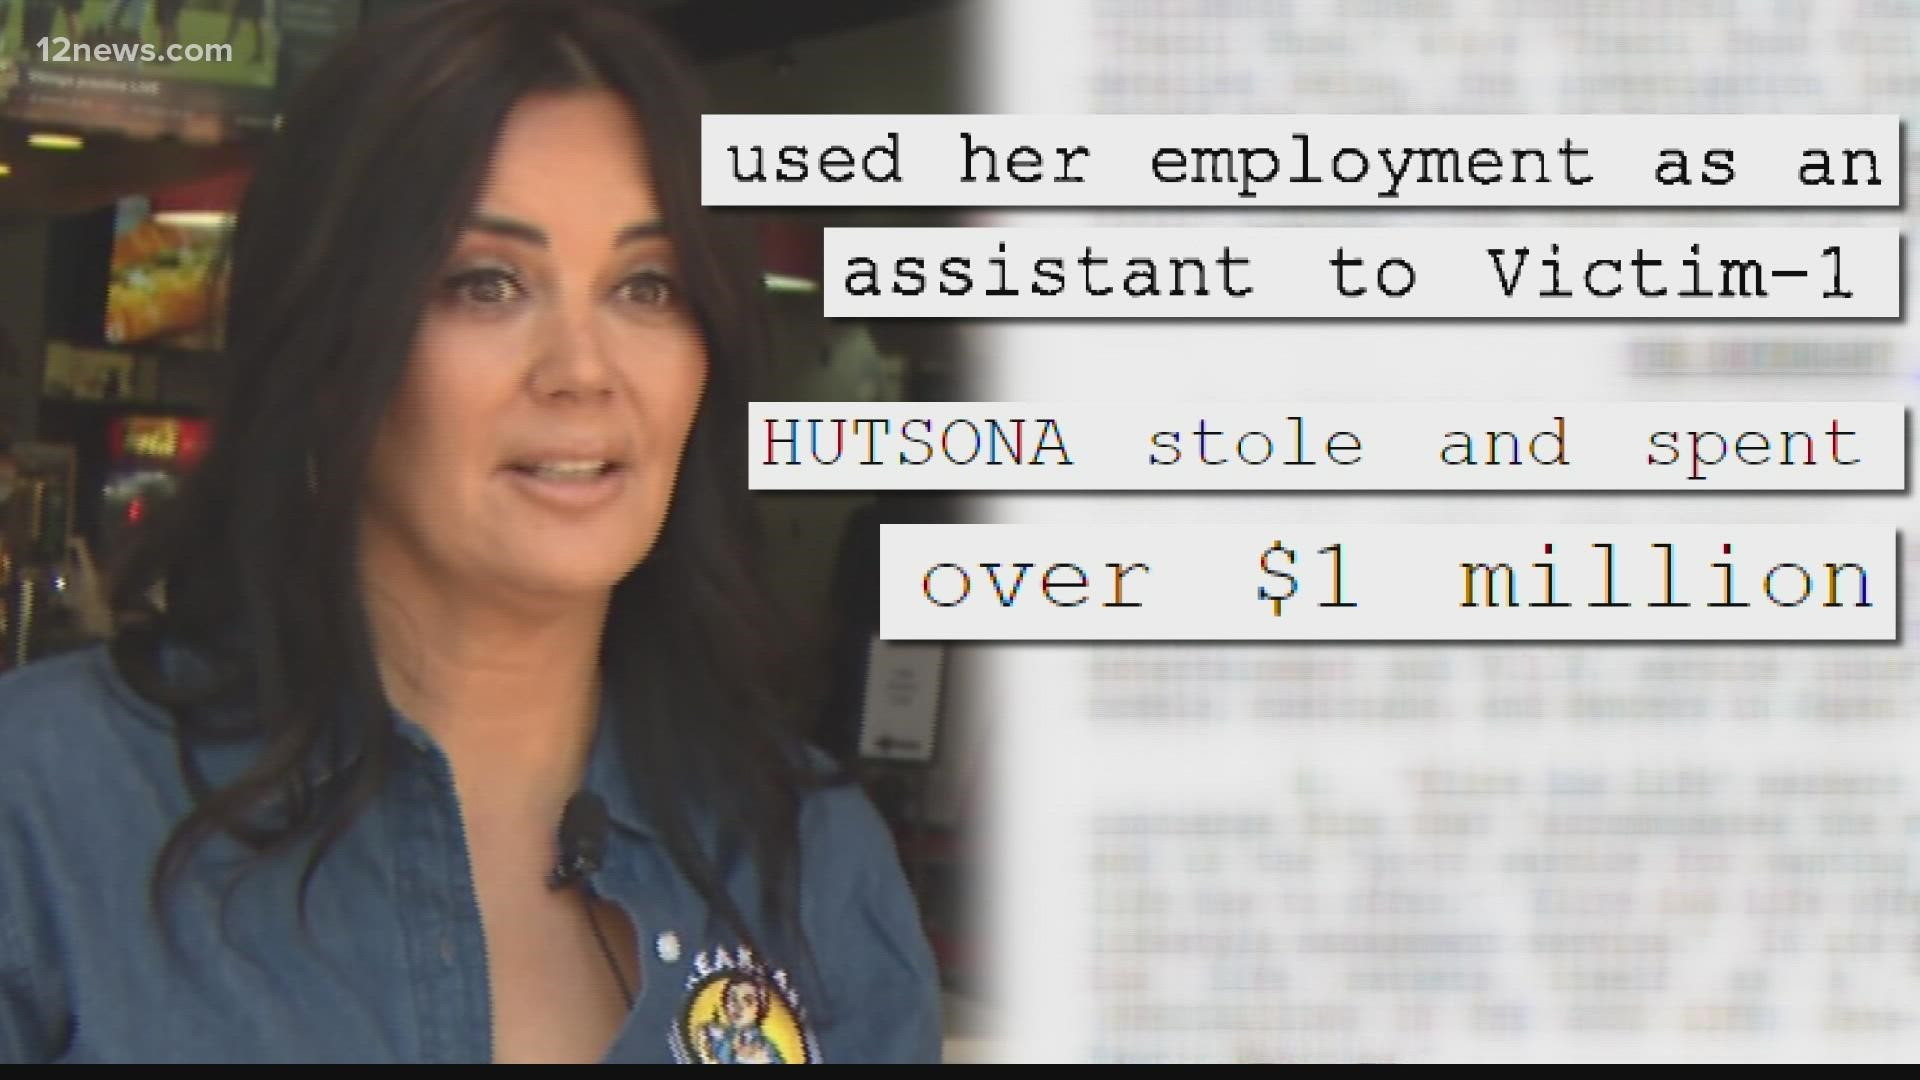 Tracii Hutsona was arrested in Arizona on wire fraud and aggravated identity theft charges for allegedly stealing more than $1 million from an actress.